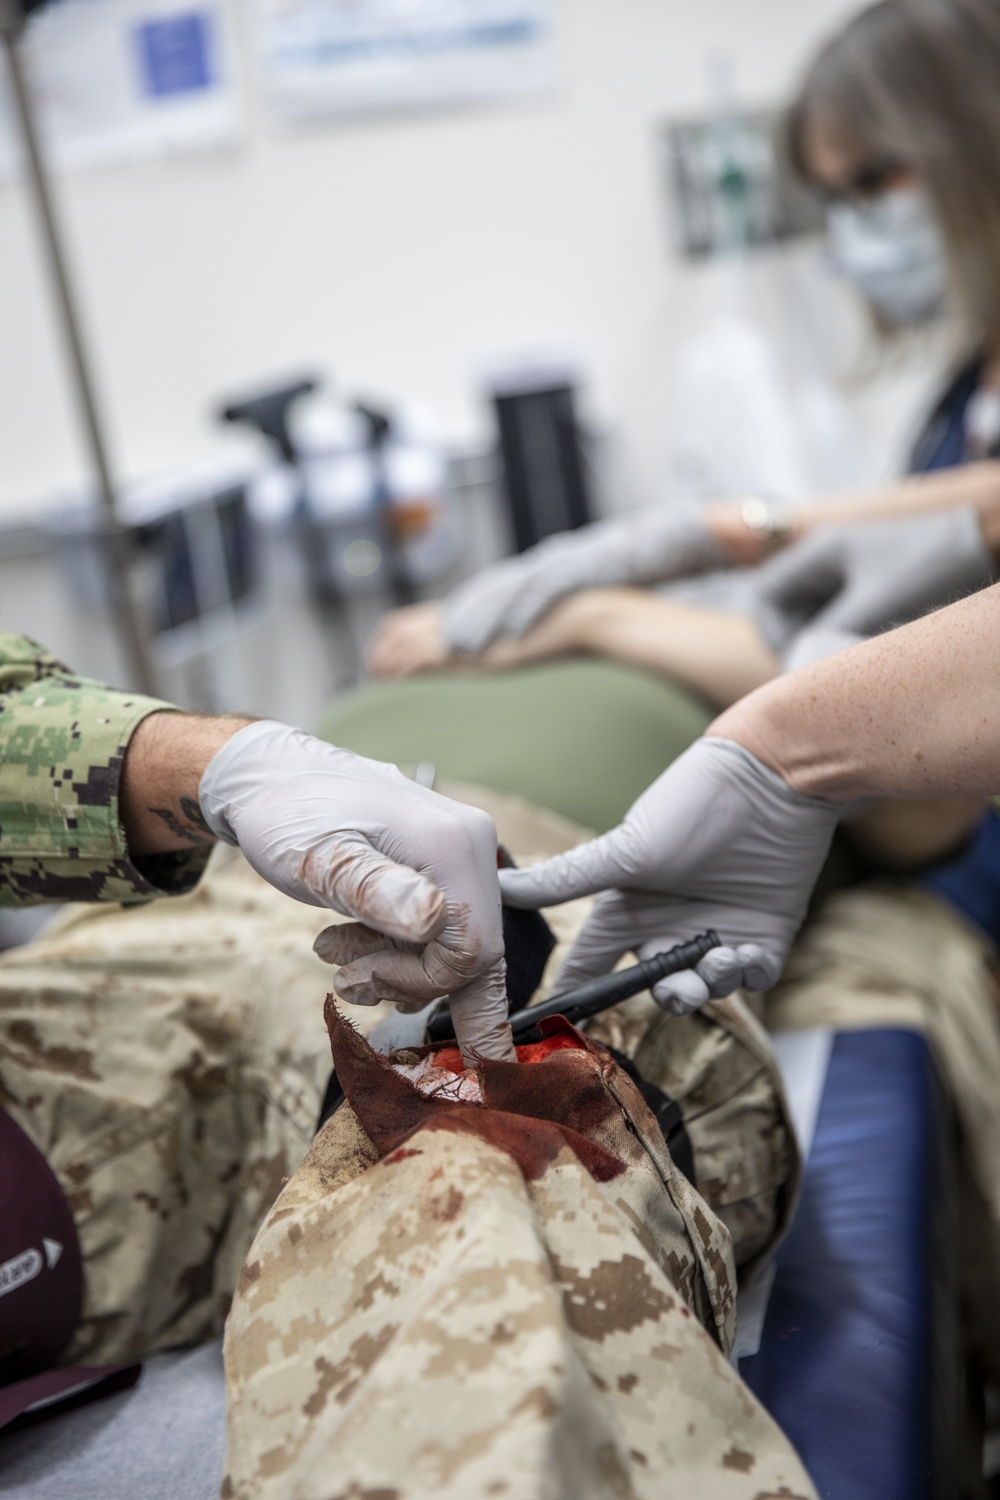 Exercise Active Shield 2020: Simulated Casualty Evacuation